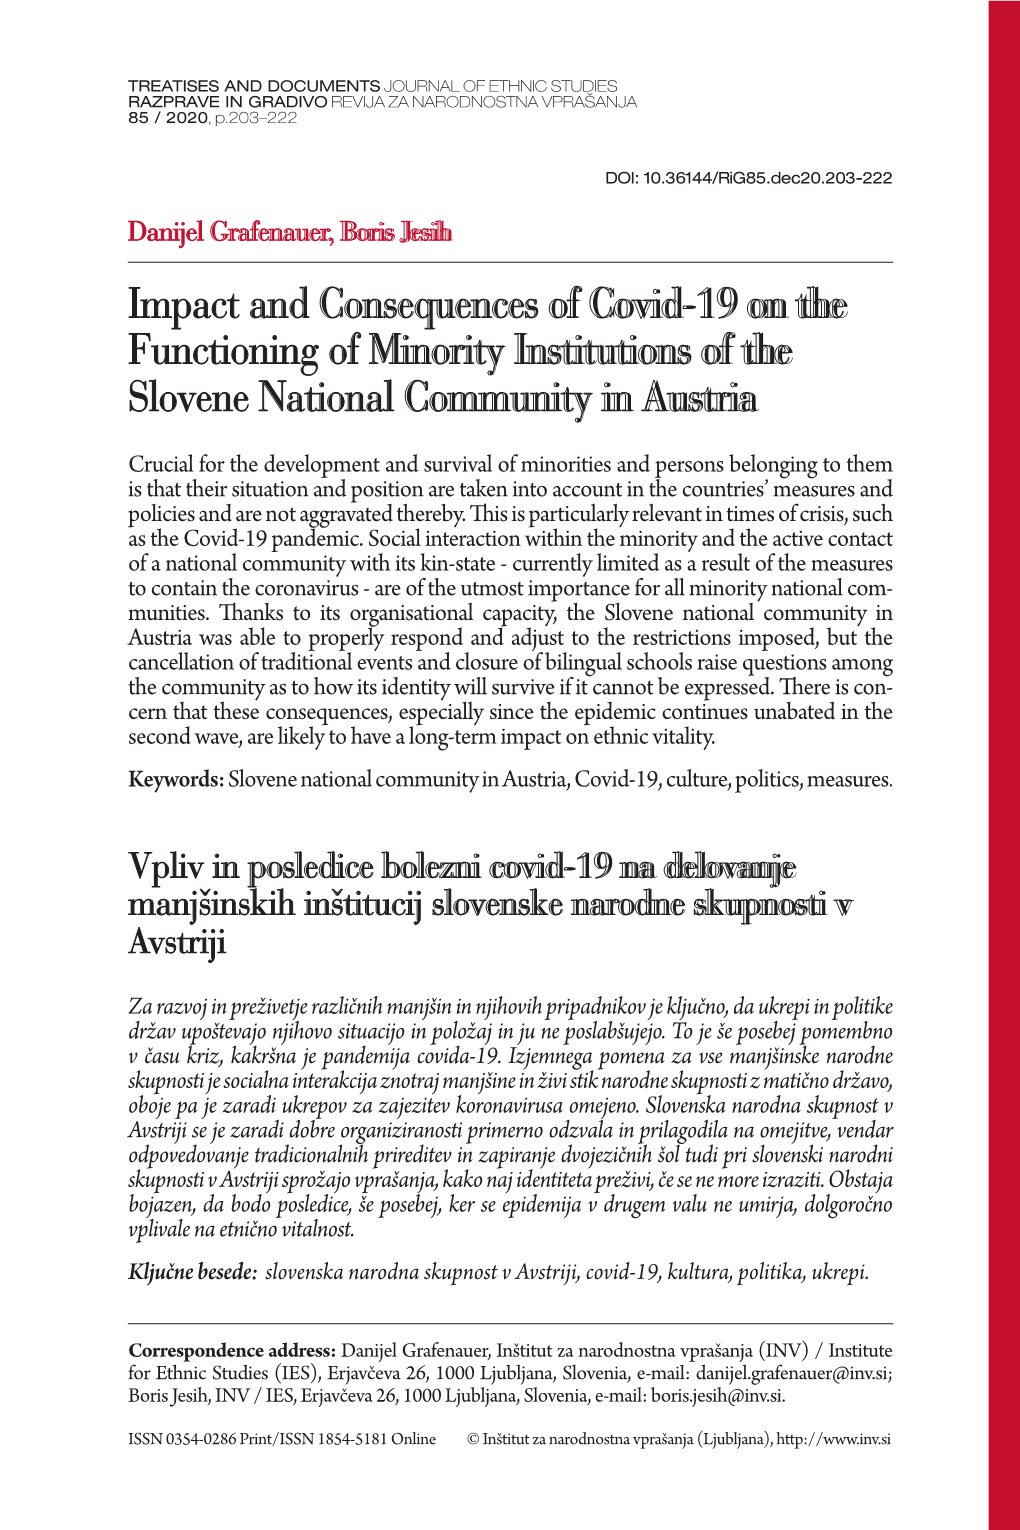 Impact and Consequences of Covid-19 on the Functioning of Minority Institutions of the Slovene National Community in Austria